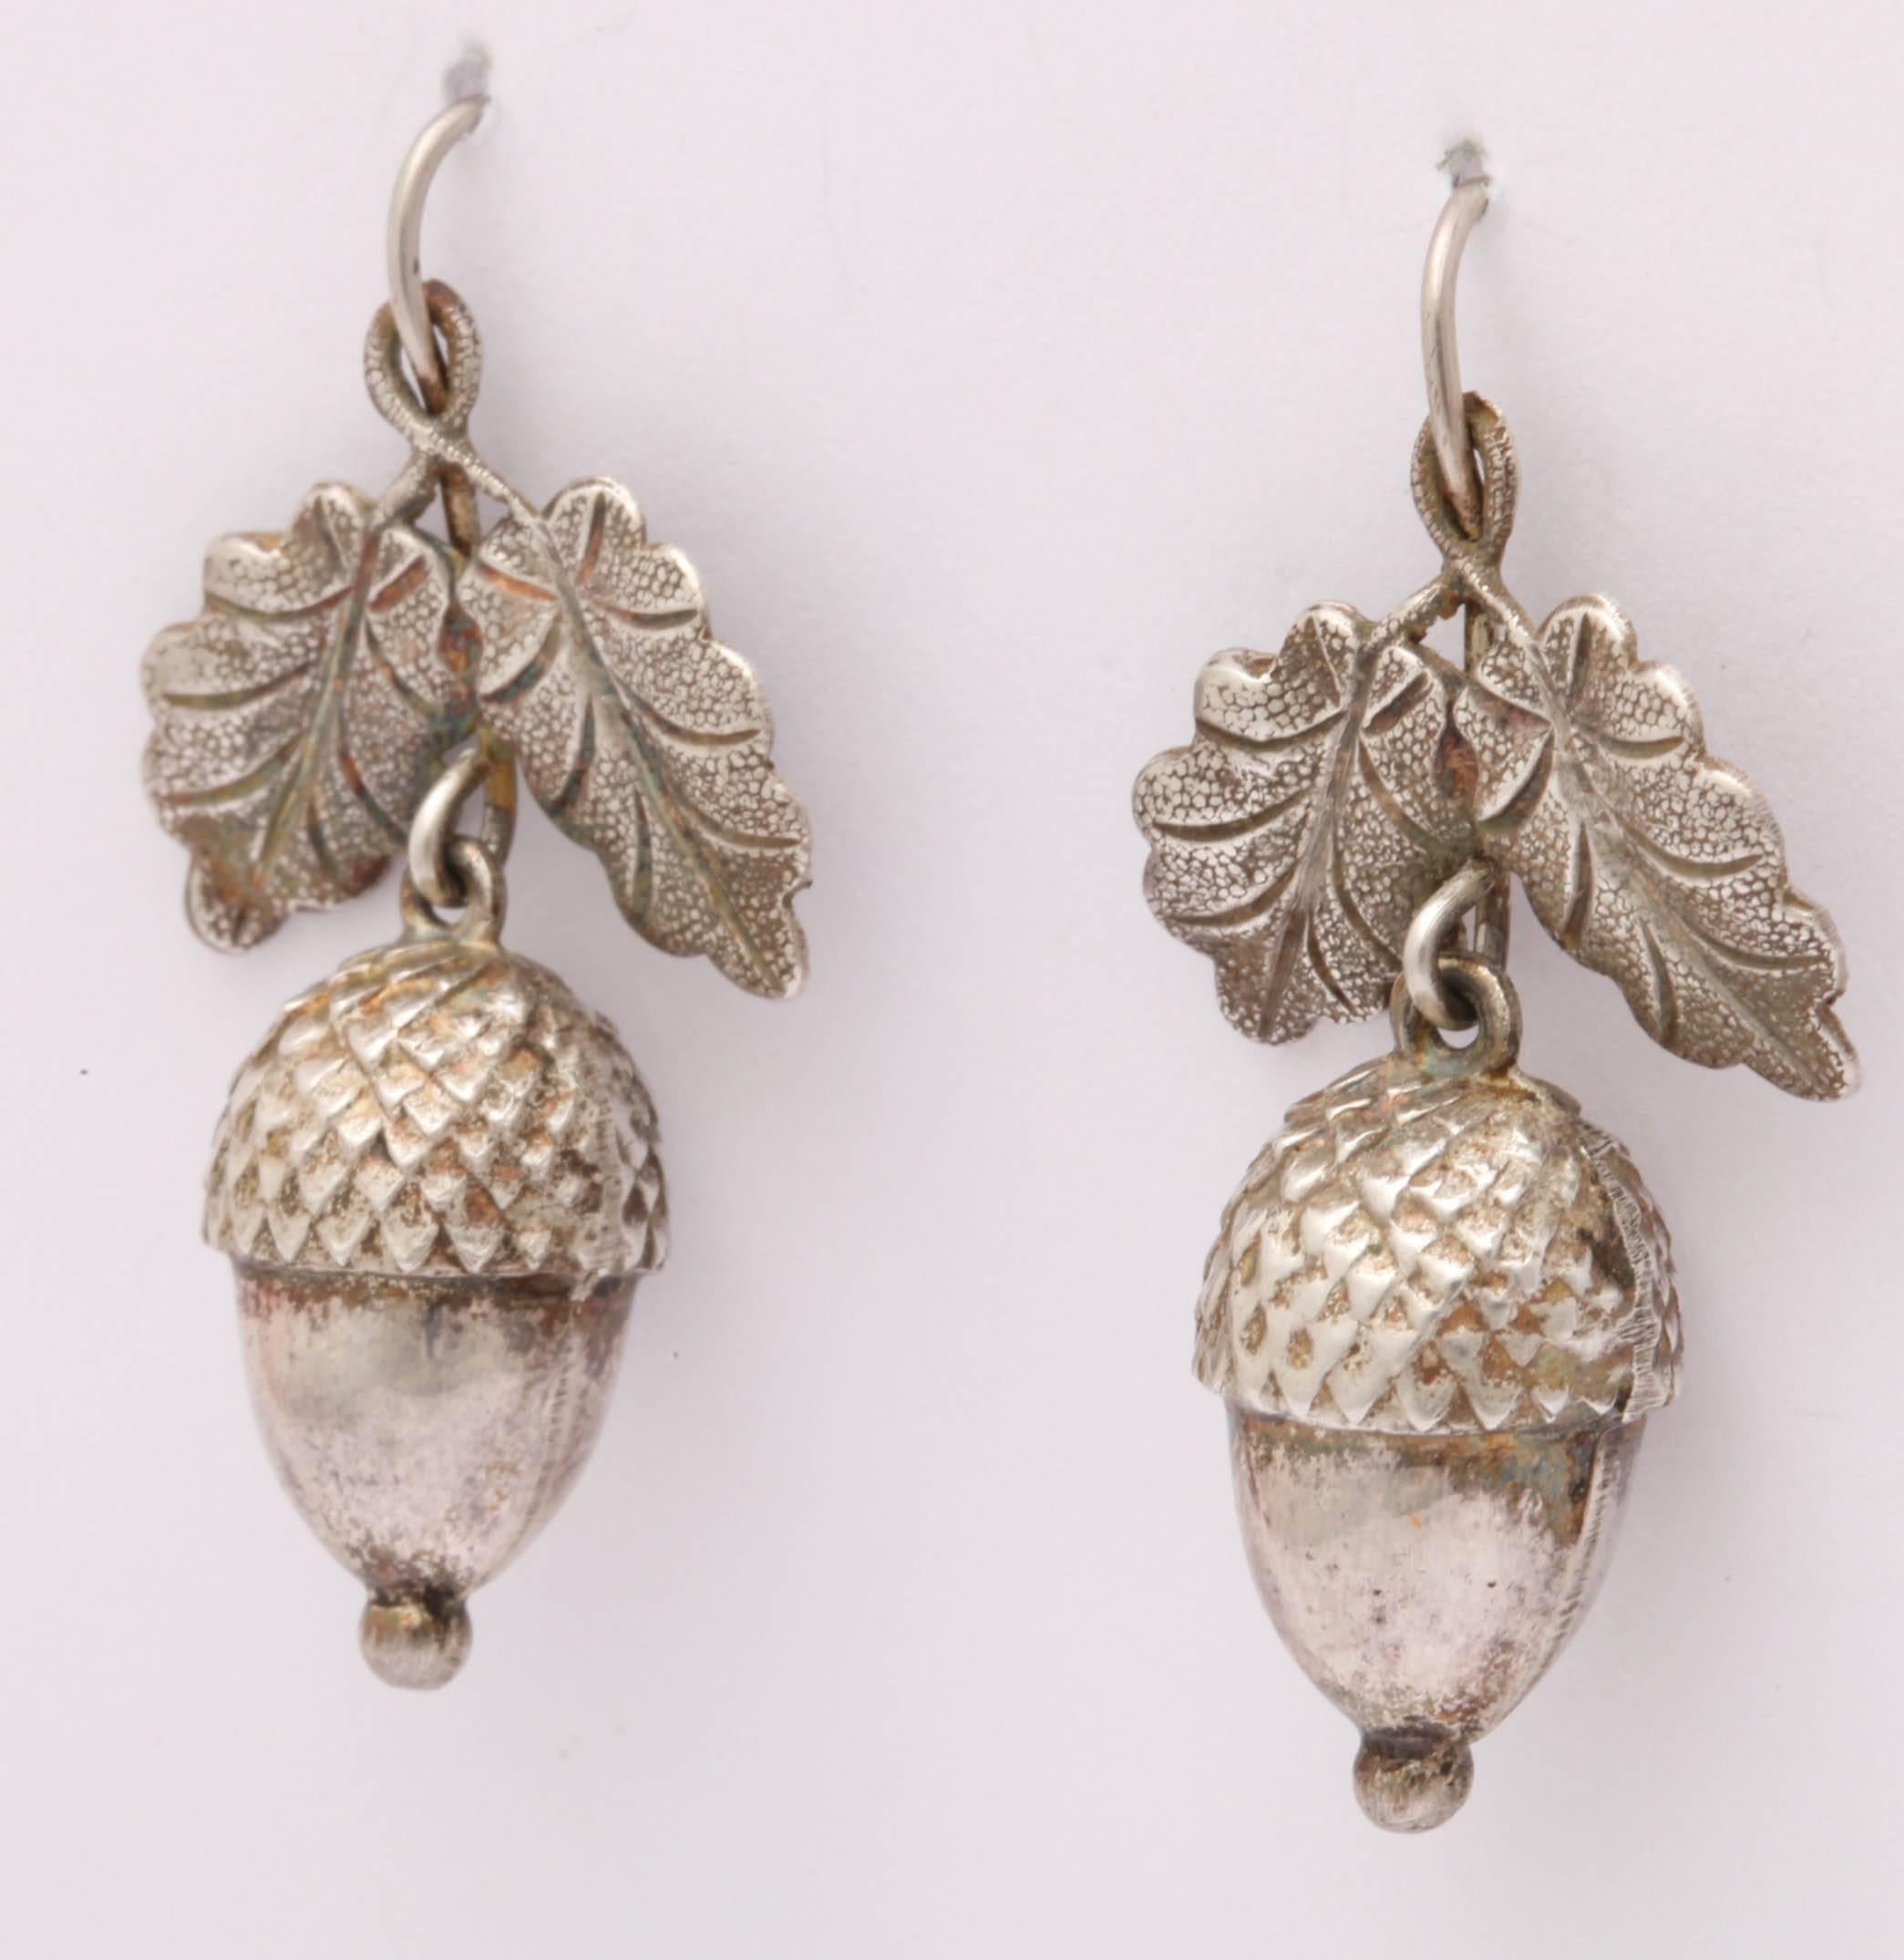 Acorn earrings are highly desired for their lightness of wear and realistic engraving. They carry the message of life and fertility. This pair measure 1 1/4
inches in length and are in excellent condition. Origin likely England. c.1860-1870. Hurry